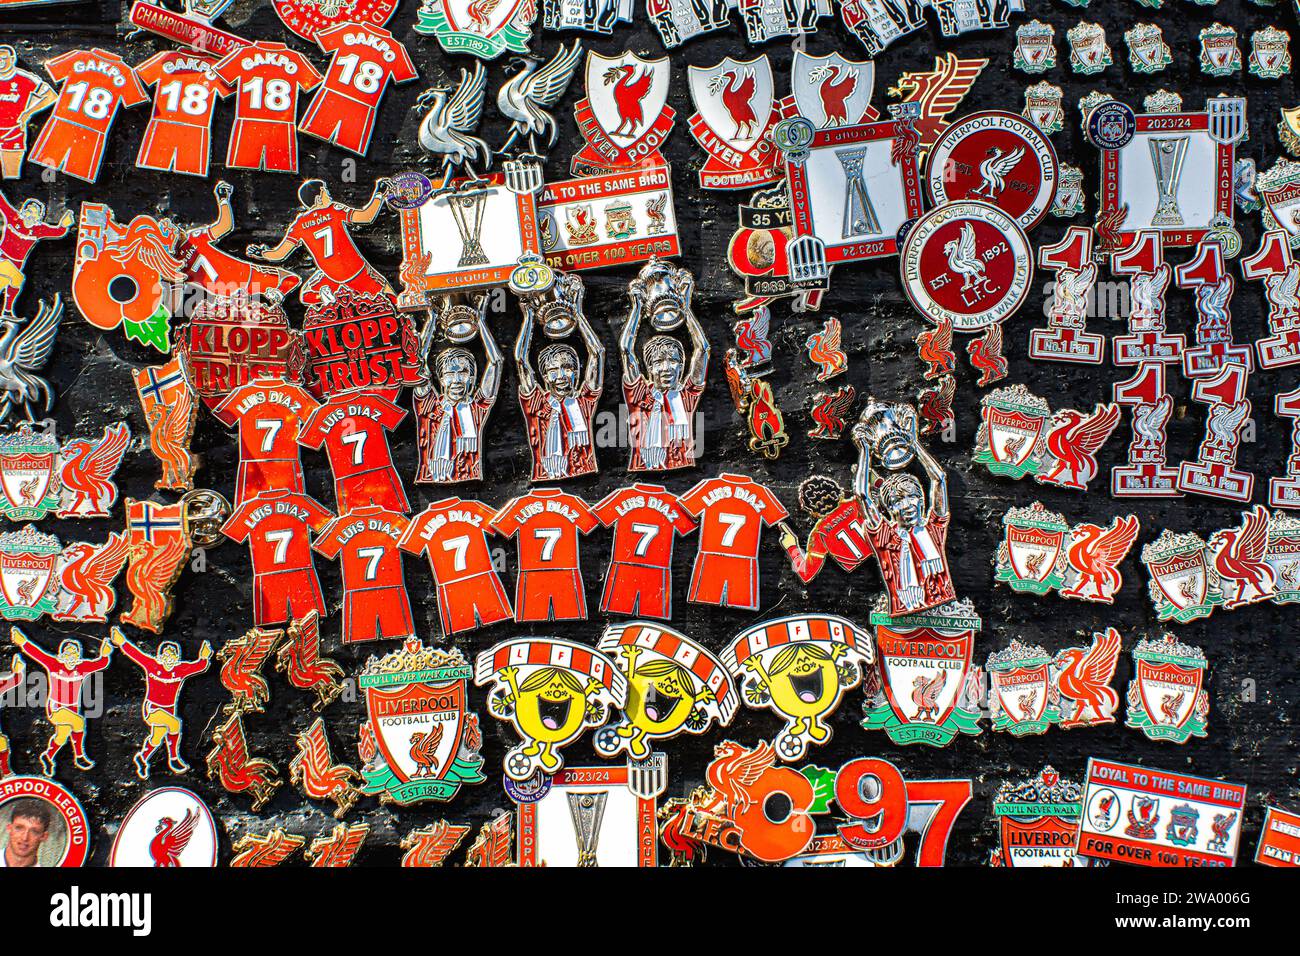 Football fan pins at a street stand in Liverpool Stock Photo